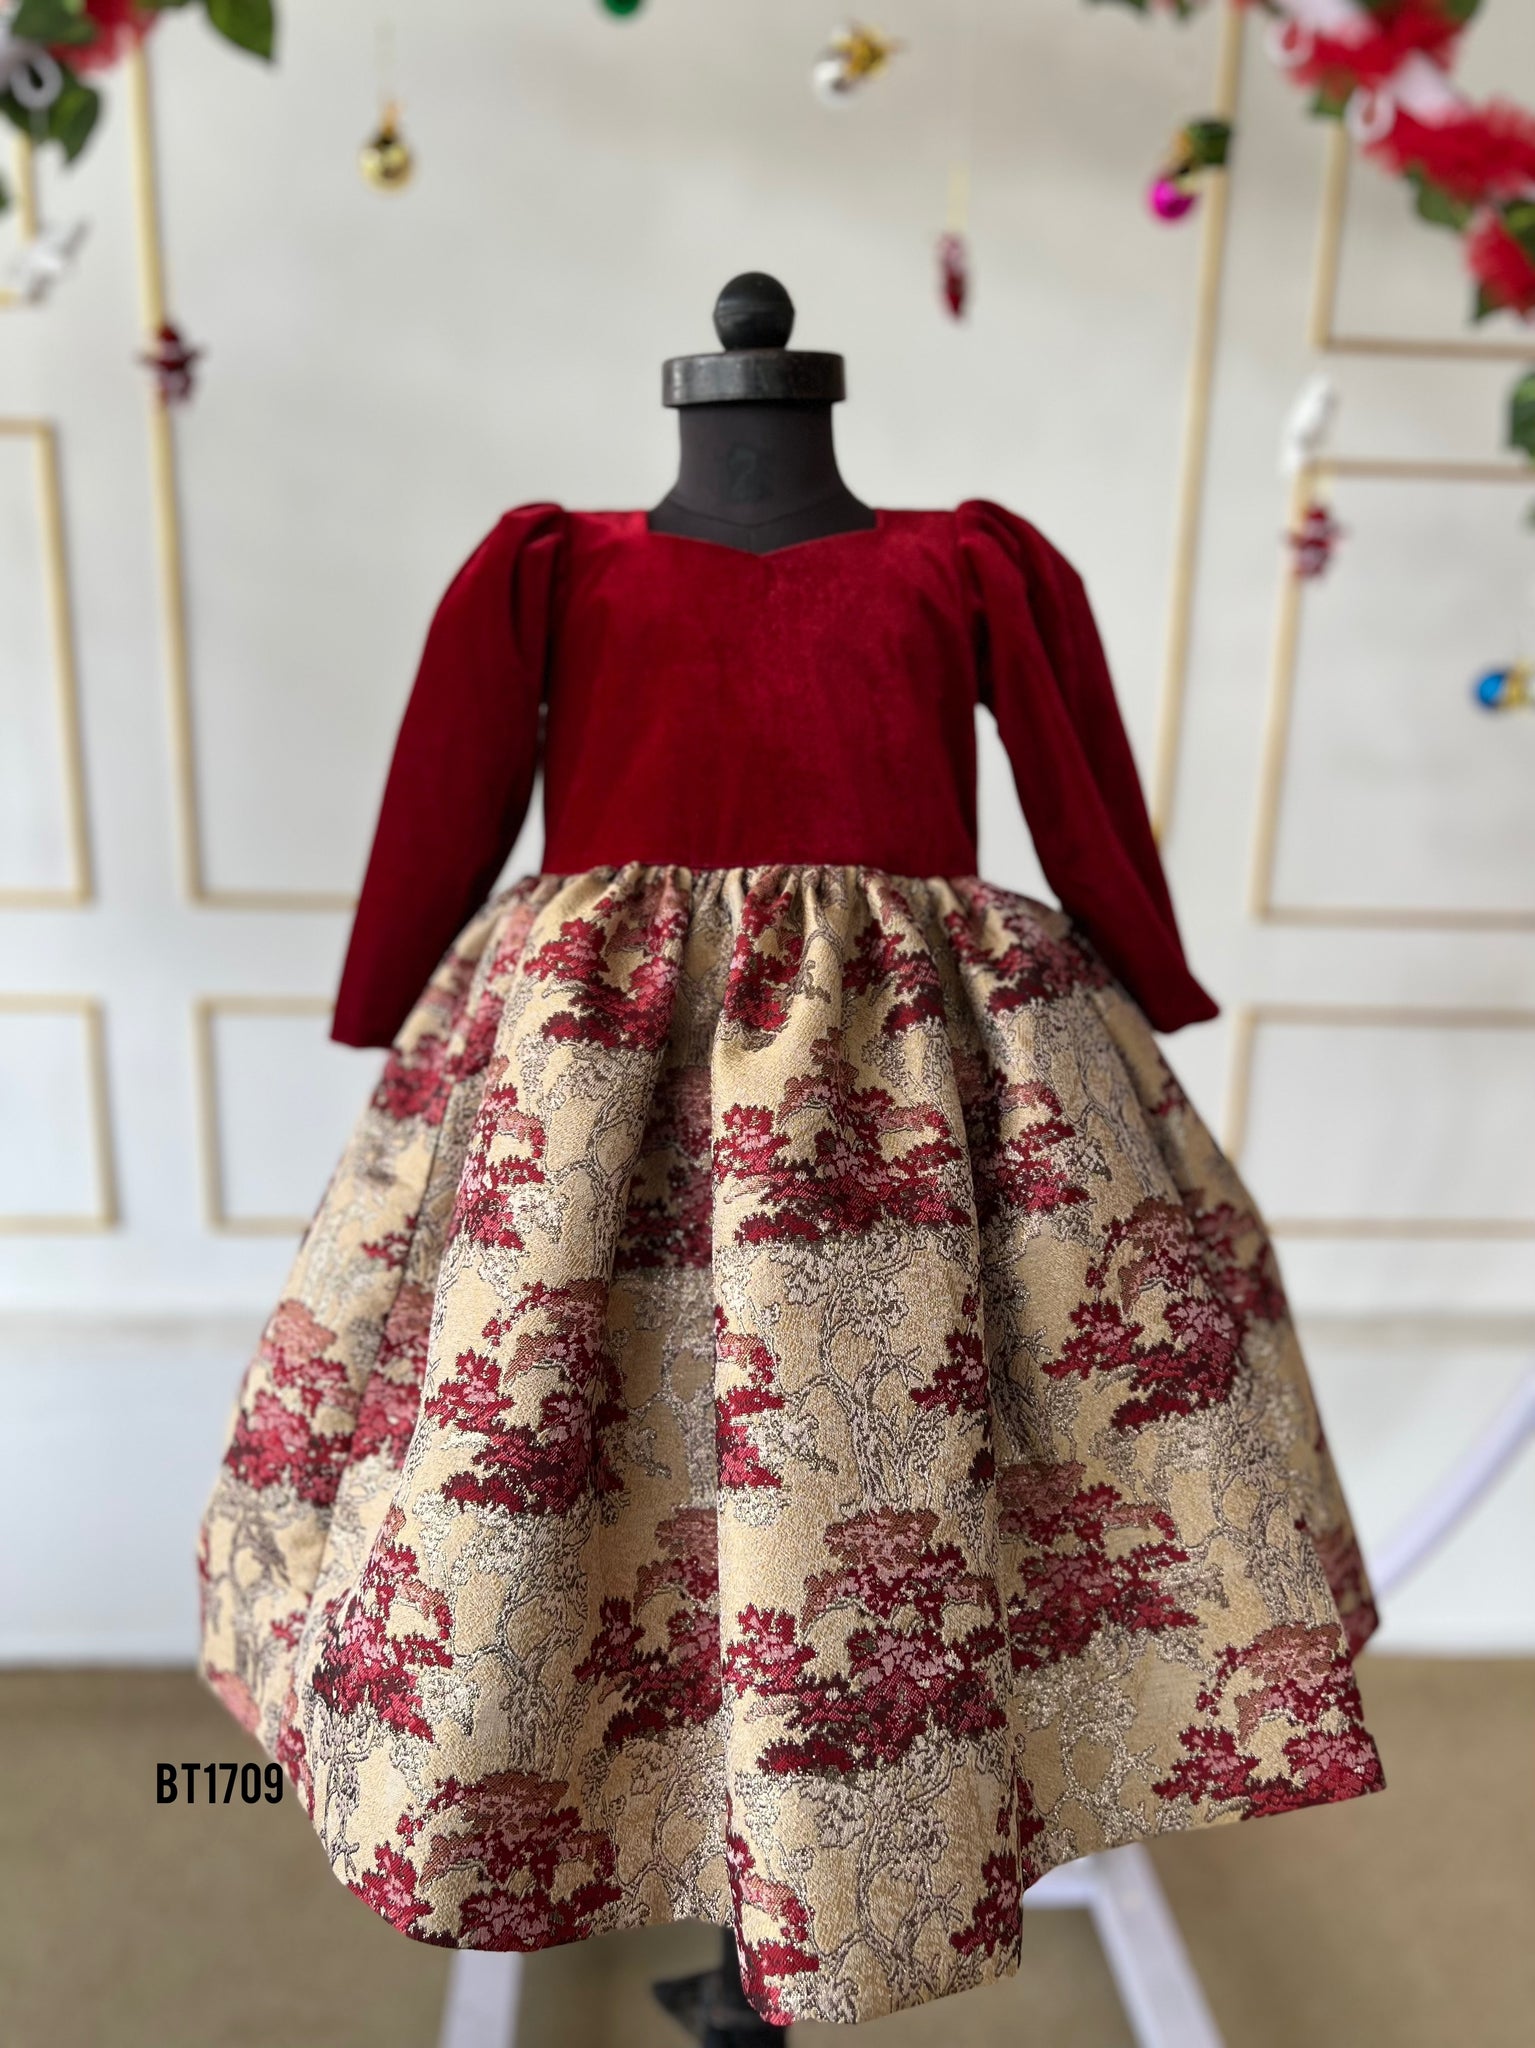 Winter Girls Party Dresses For Little Girls Long Sleeve Knitted Sweater  With Pleated Details Perfect For Christmas Vestidos Q0716 From Sihuai04,  $11.54 | DHgate.Com